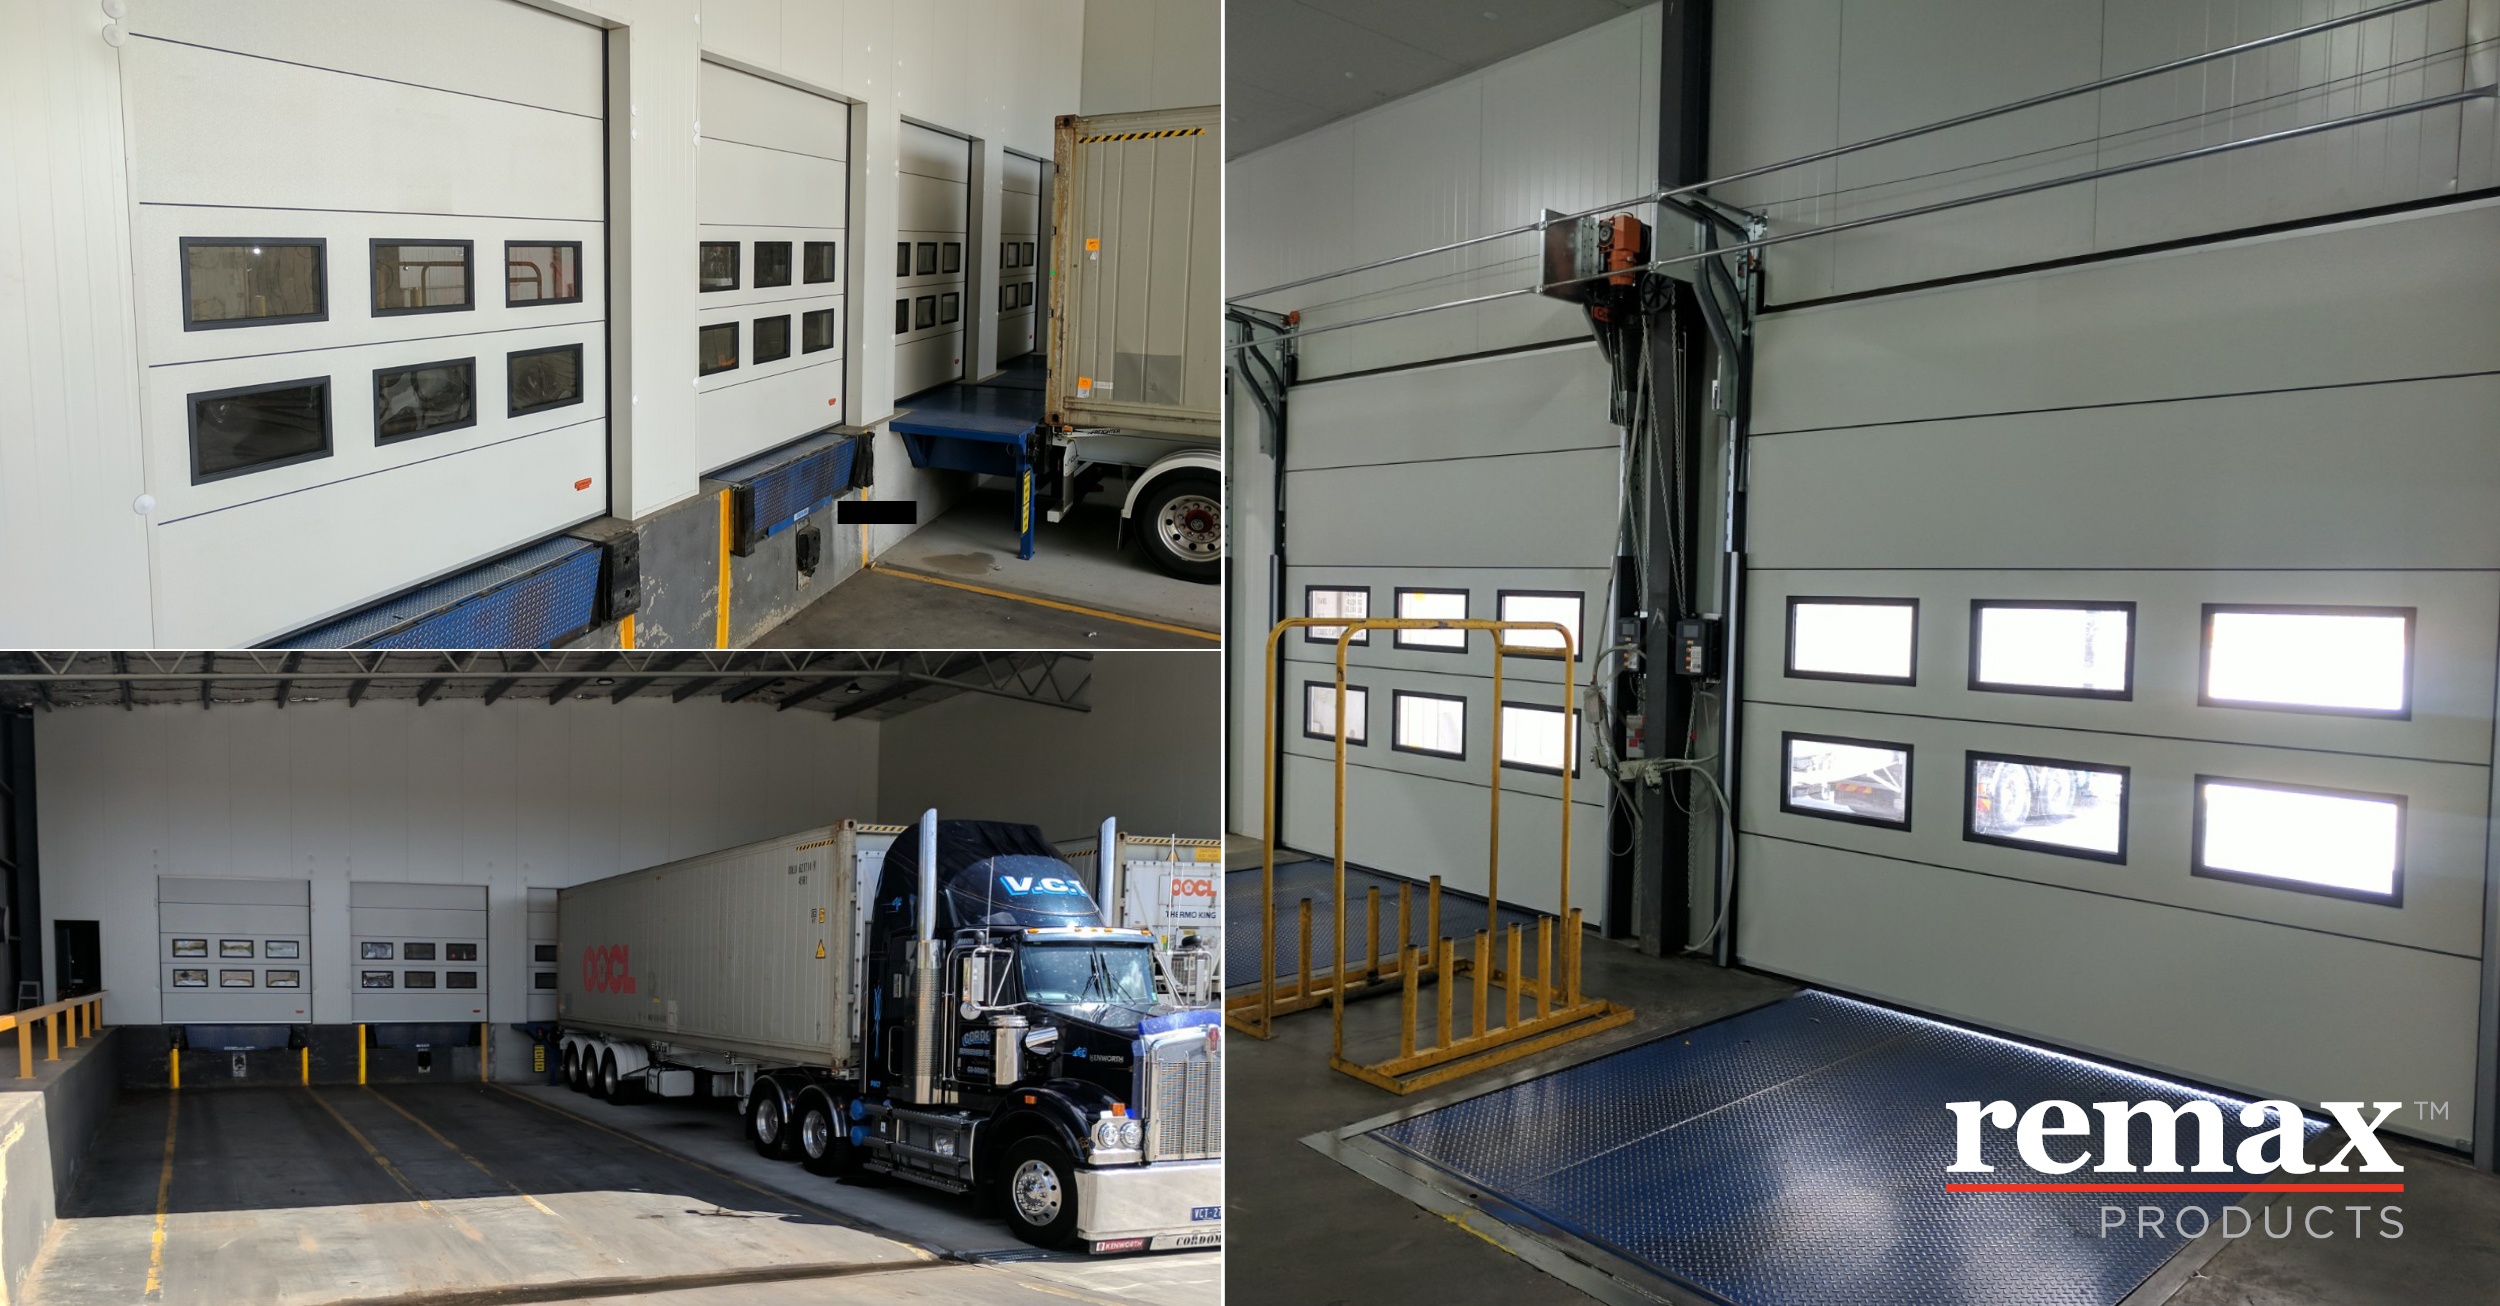 Leslie Refrigerated Transport loading dock doors which are insulated and fold up